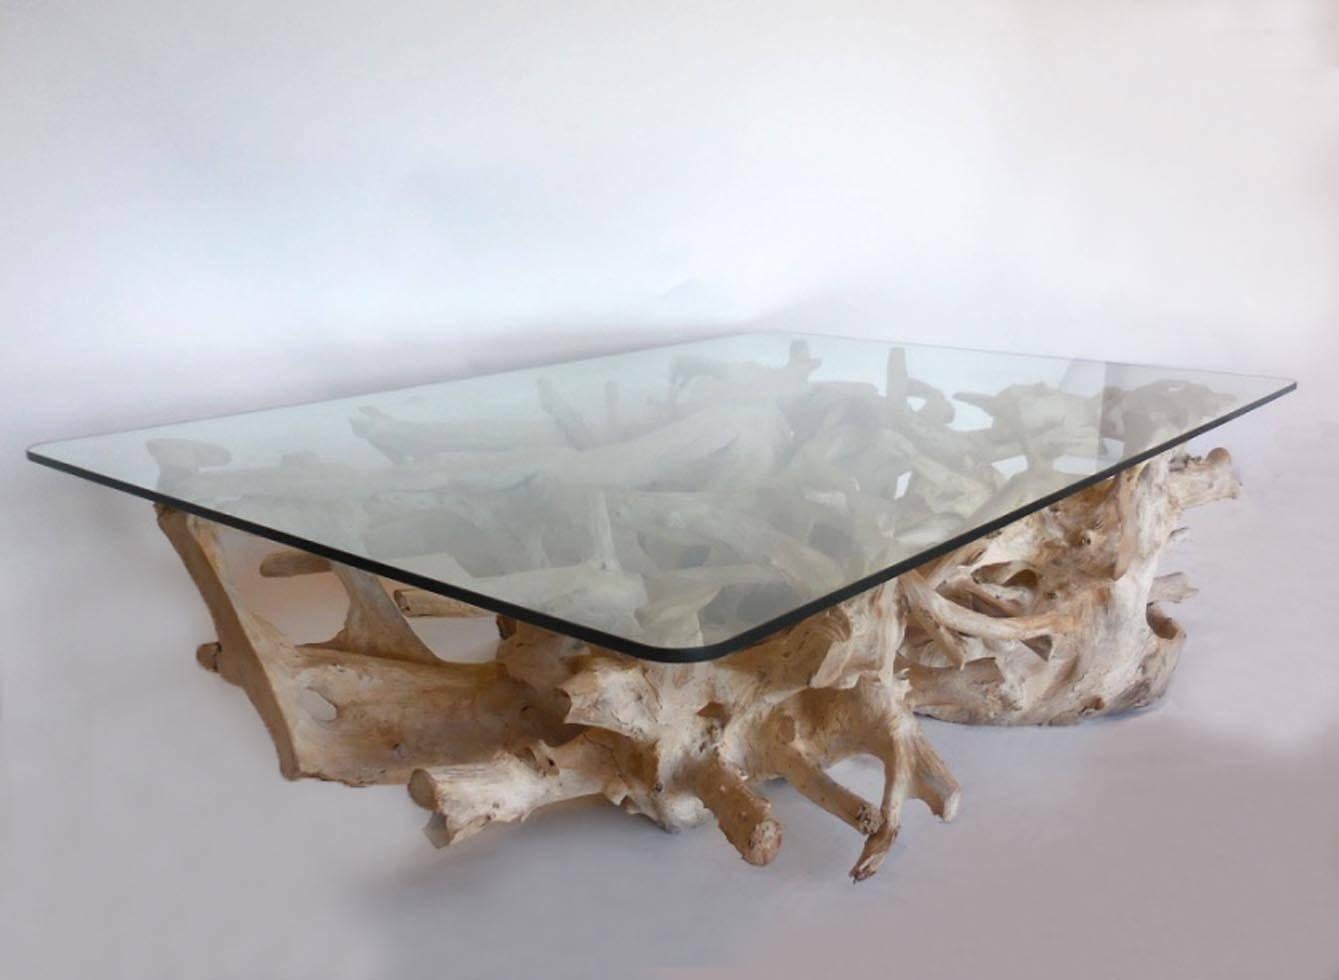 Fabulous light color/driftwood teak root base with intertwining different size roots. Very sculptural. Glass top is rectangular and is 1/2